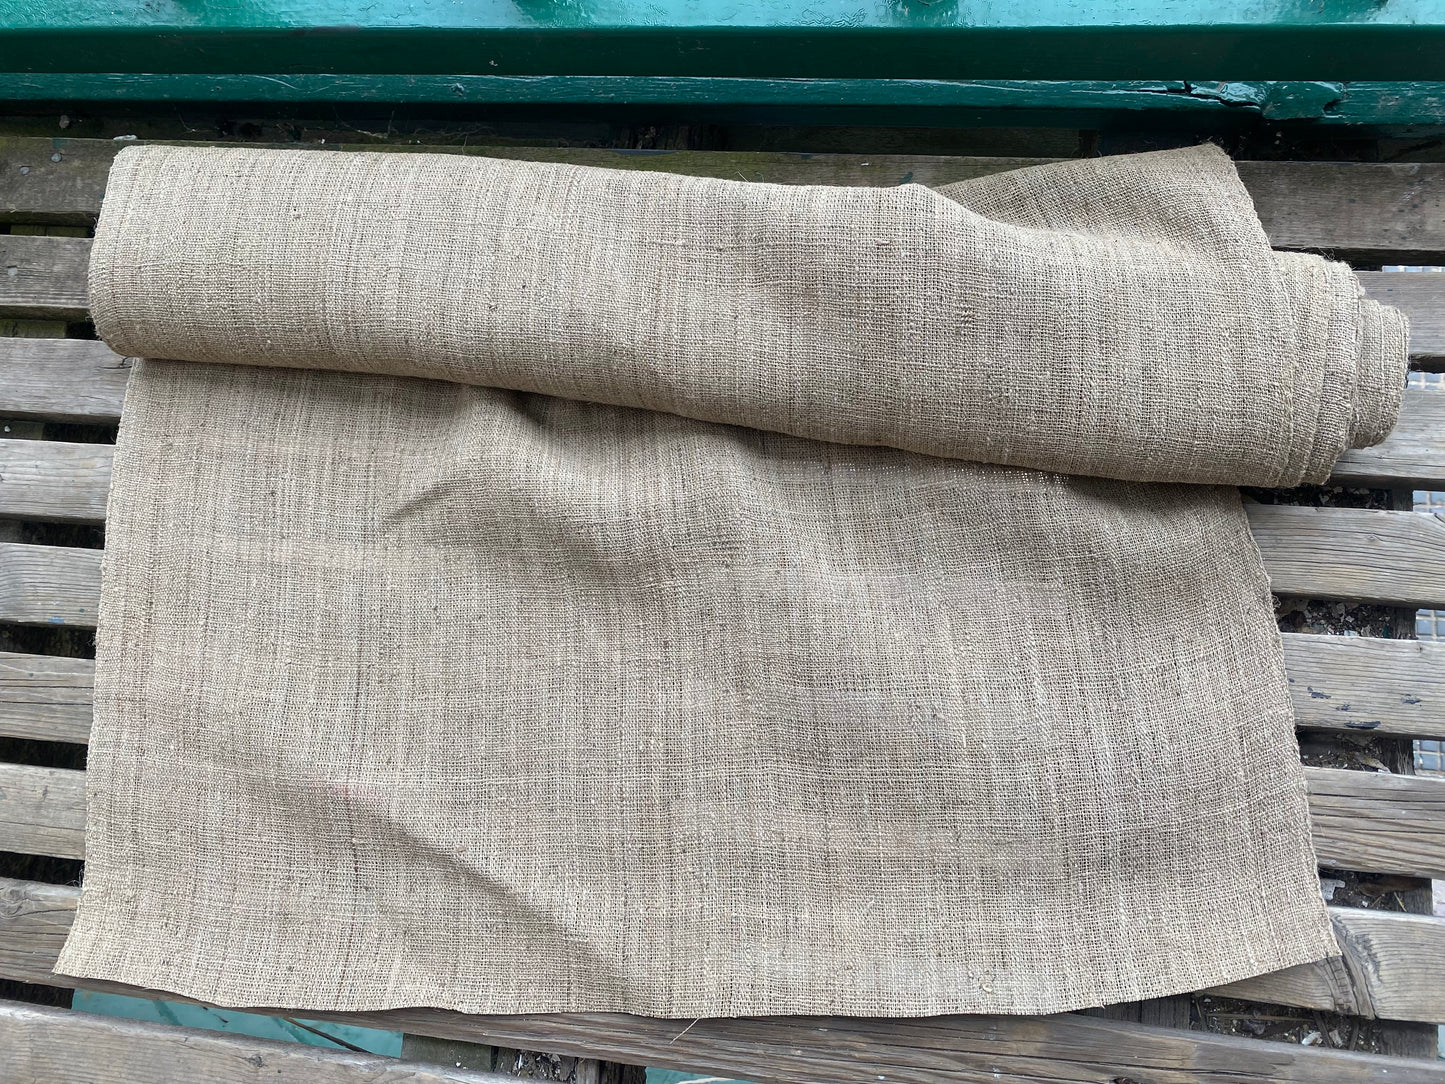 100% Himalayan giant nettle fabric - In Loose or tight weave